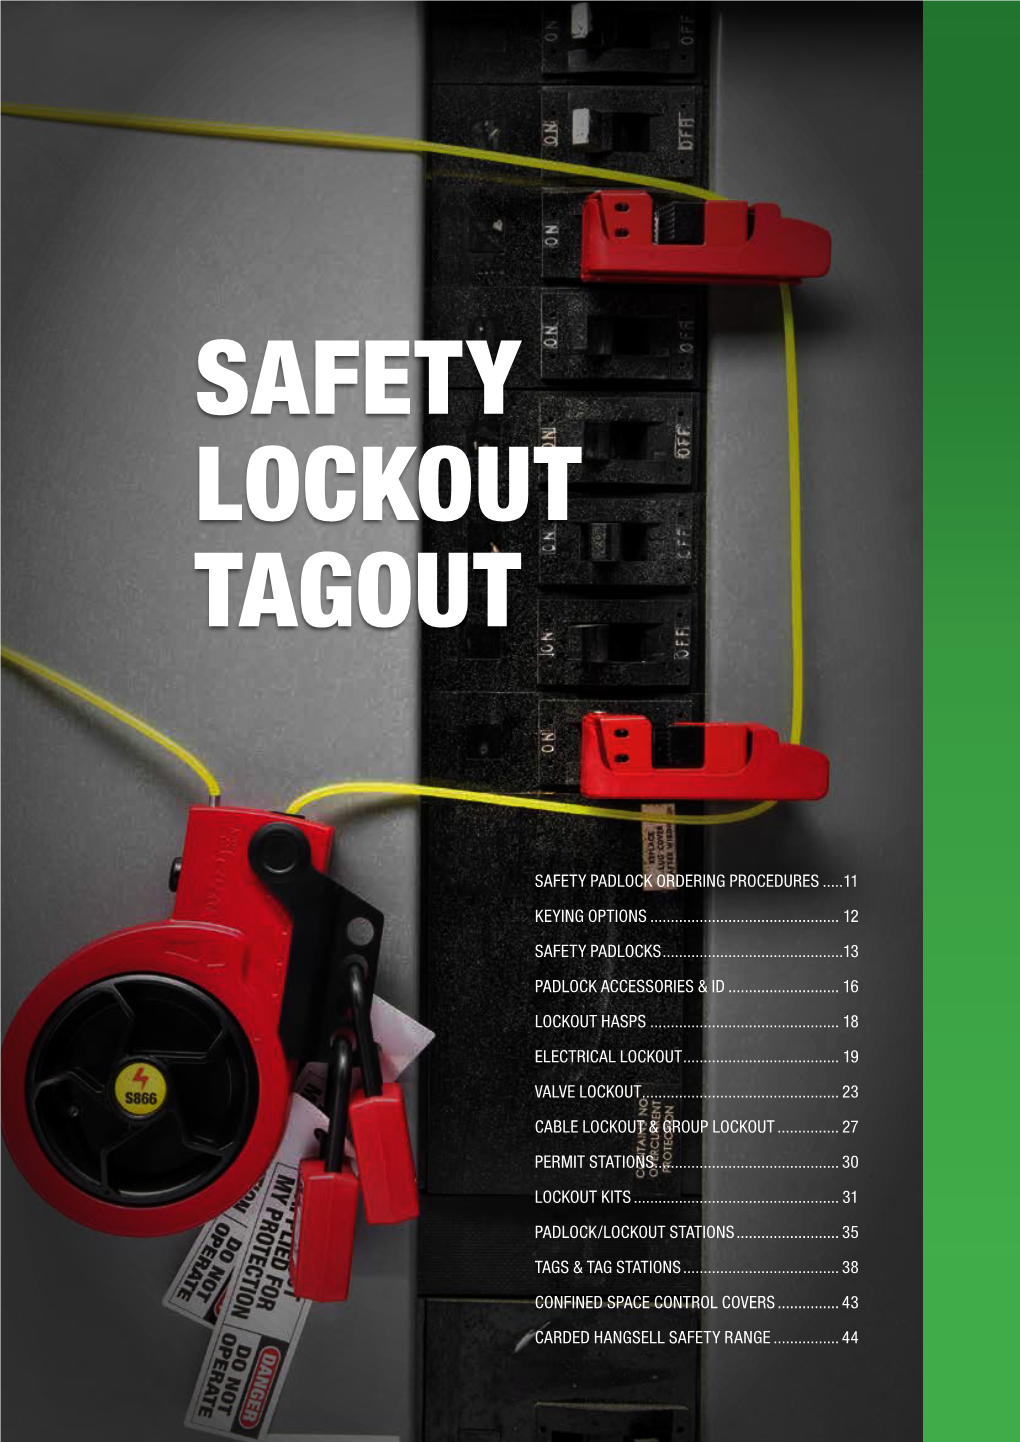 Download the Master Lock Safety Solutions Product Catalog Today!